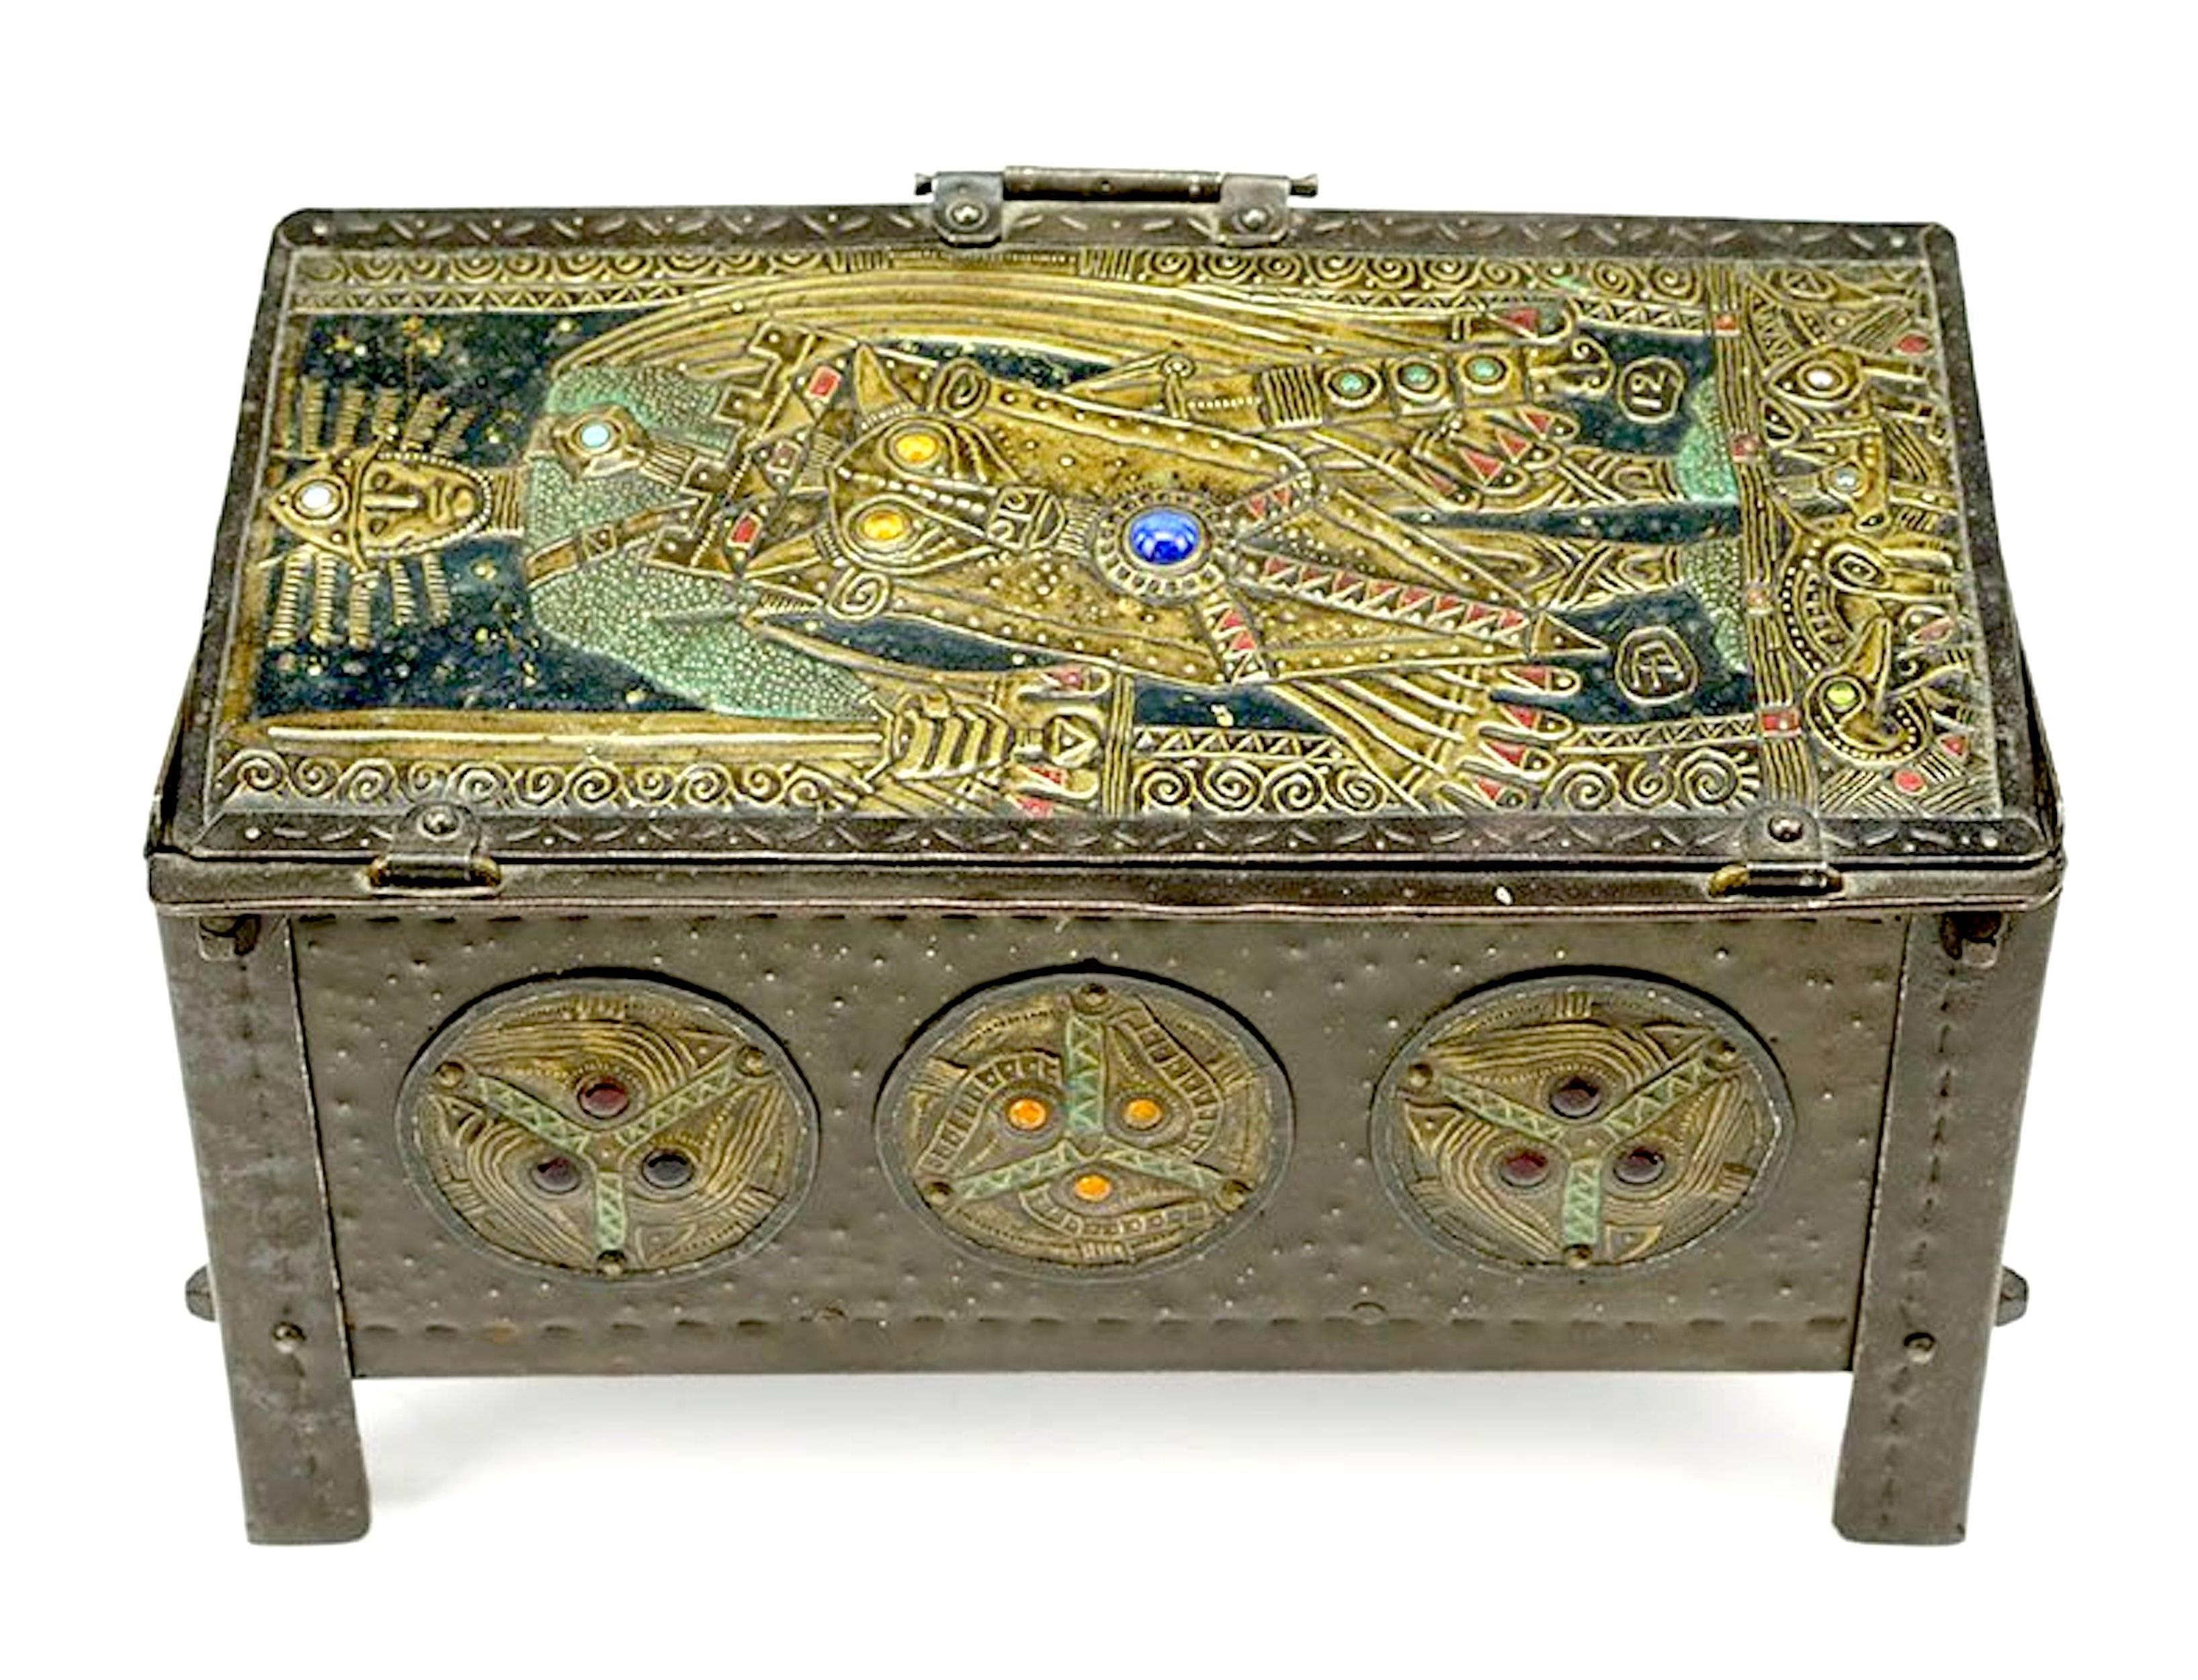 Metal repousse with glass cabochons,

Alfred-Louis-Achille Daguet was a metalsmith who specialized in repoussé copper panels made for application to hinged boxes, mantel clocks, picture frames, album covers, and elements of desk sets. His